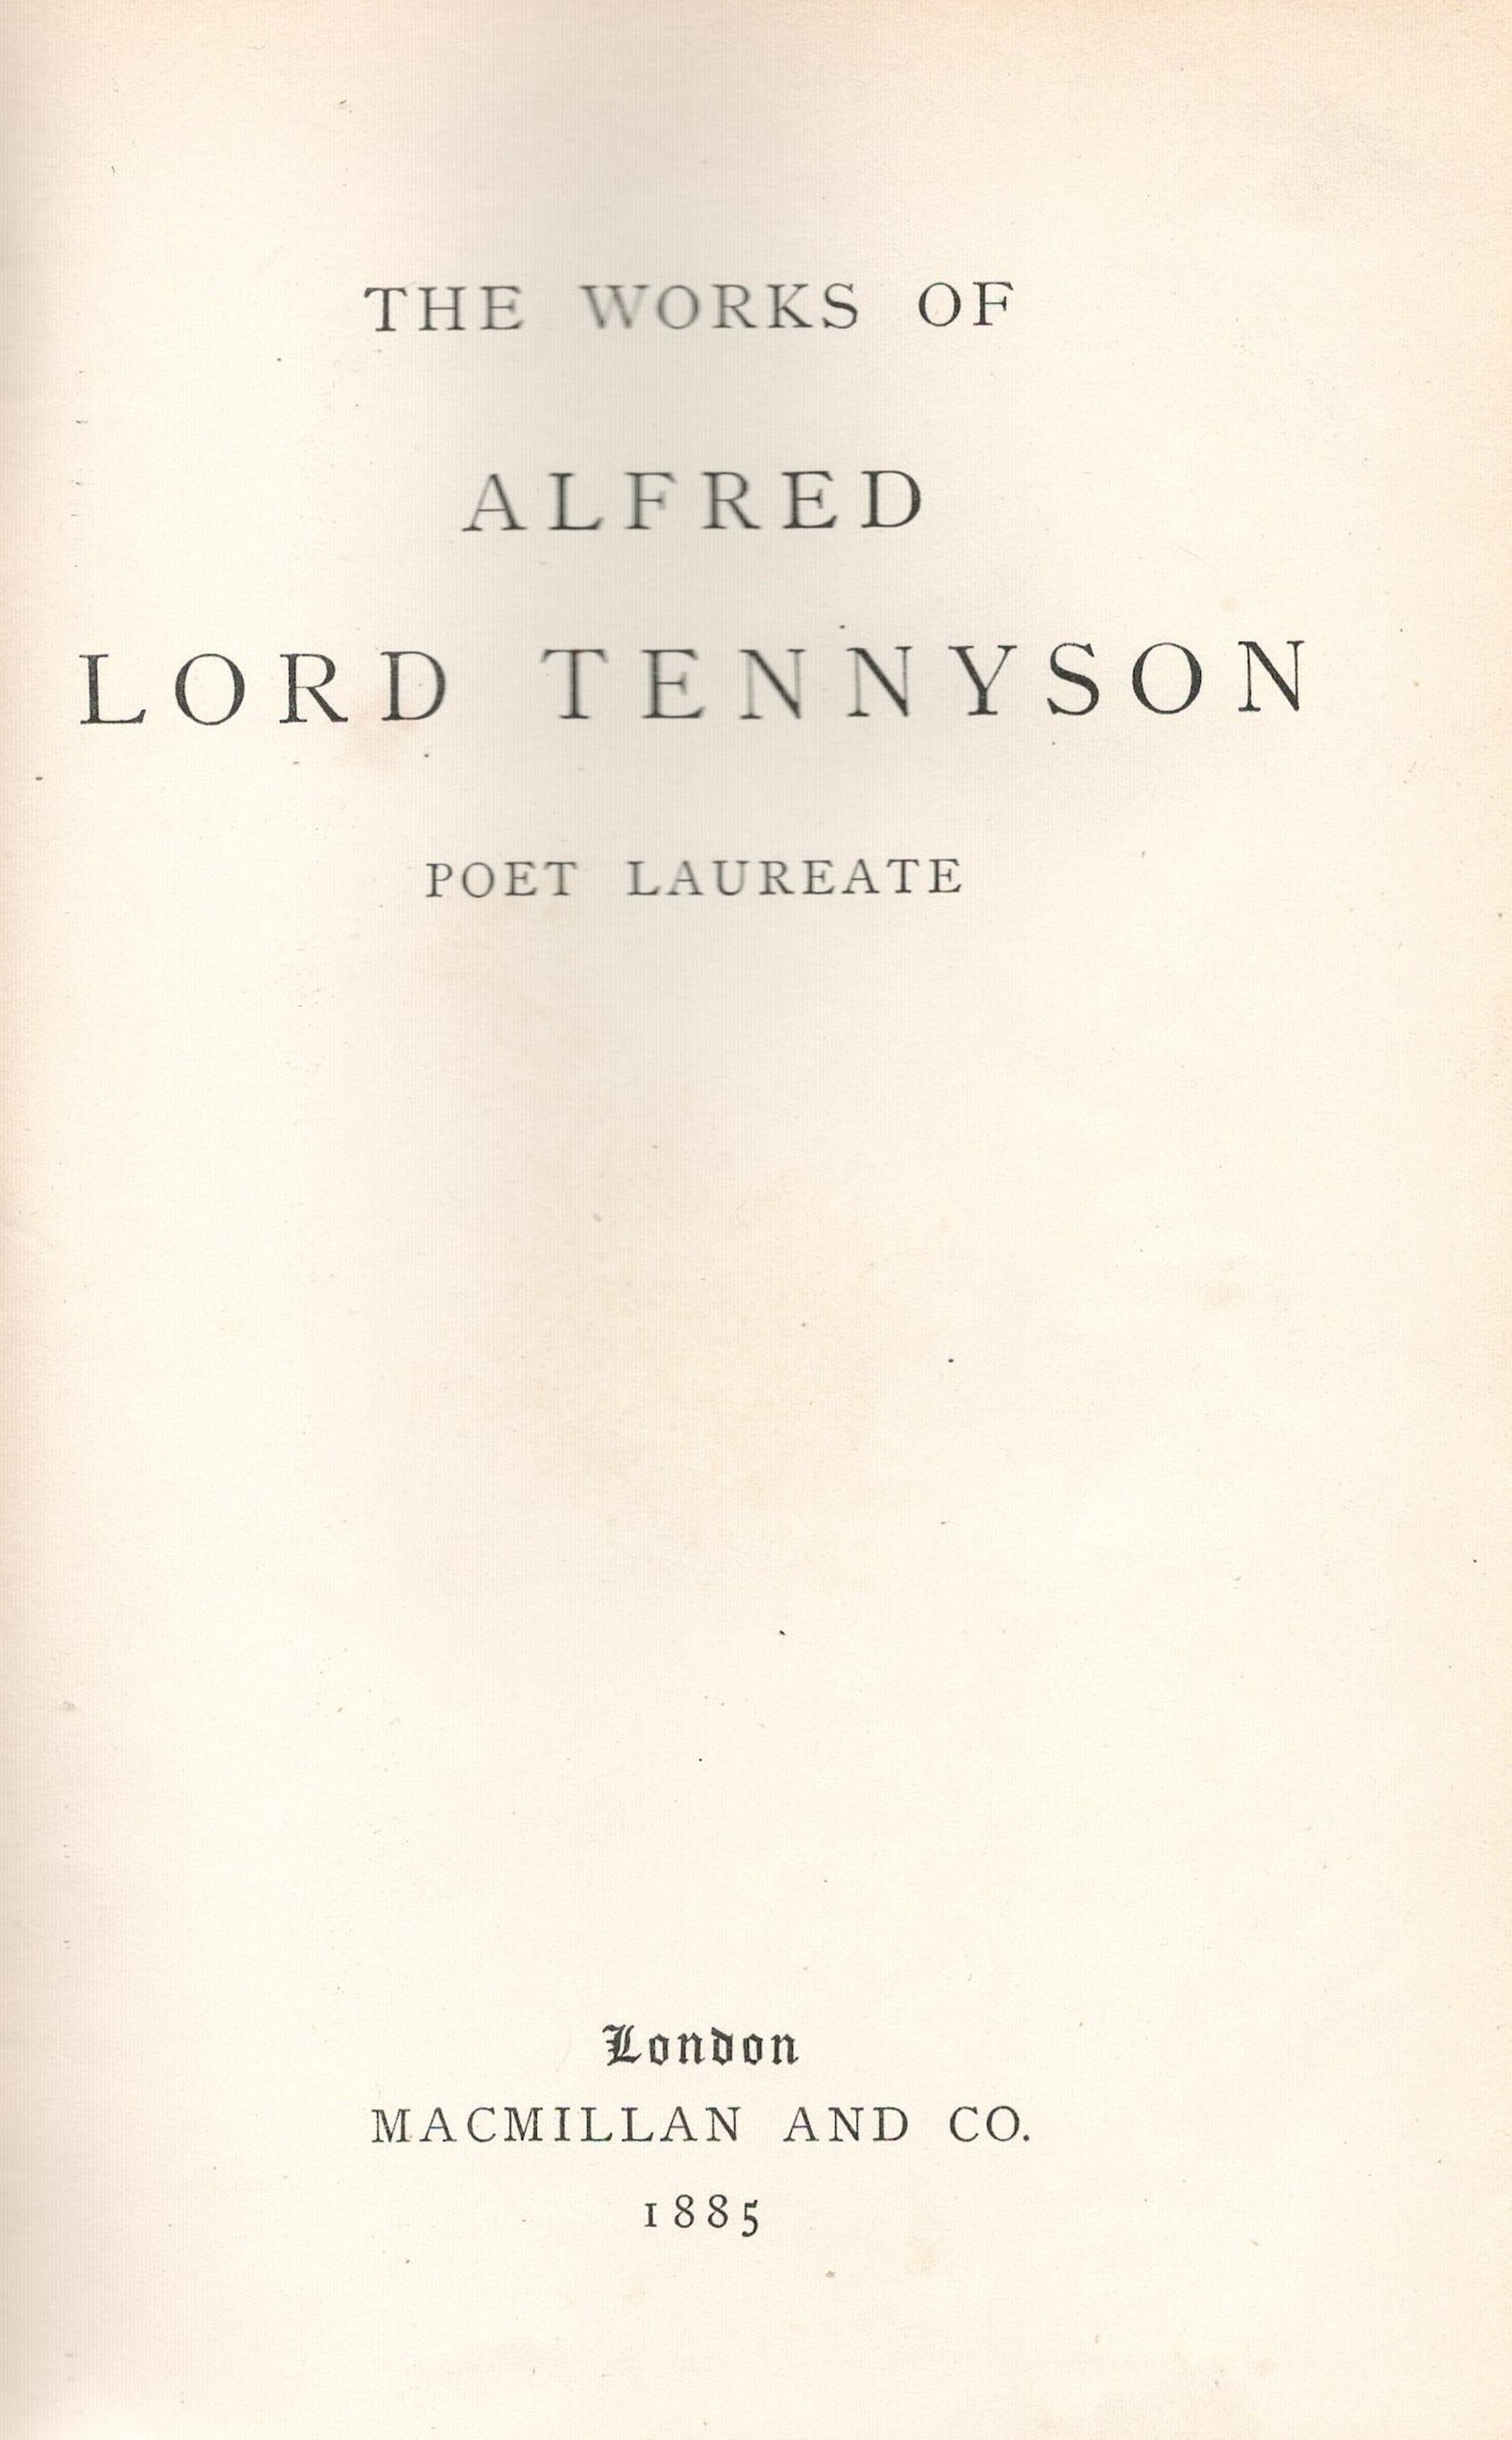 The Works of Alfred Lord Tennyson Poet Laureate First Edition 1885 Hardback Book published by - Image 2 of 3